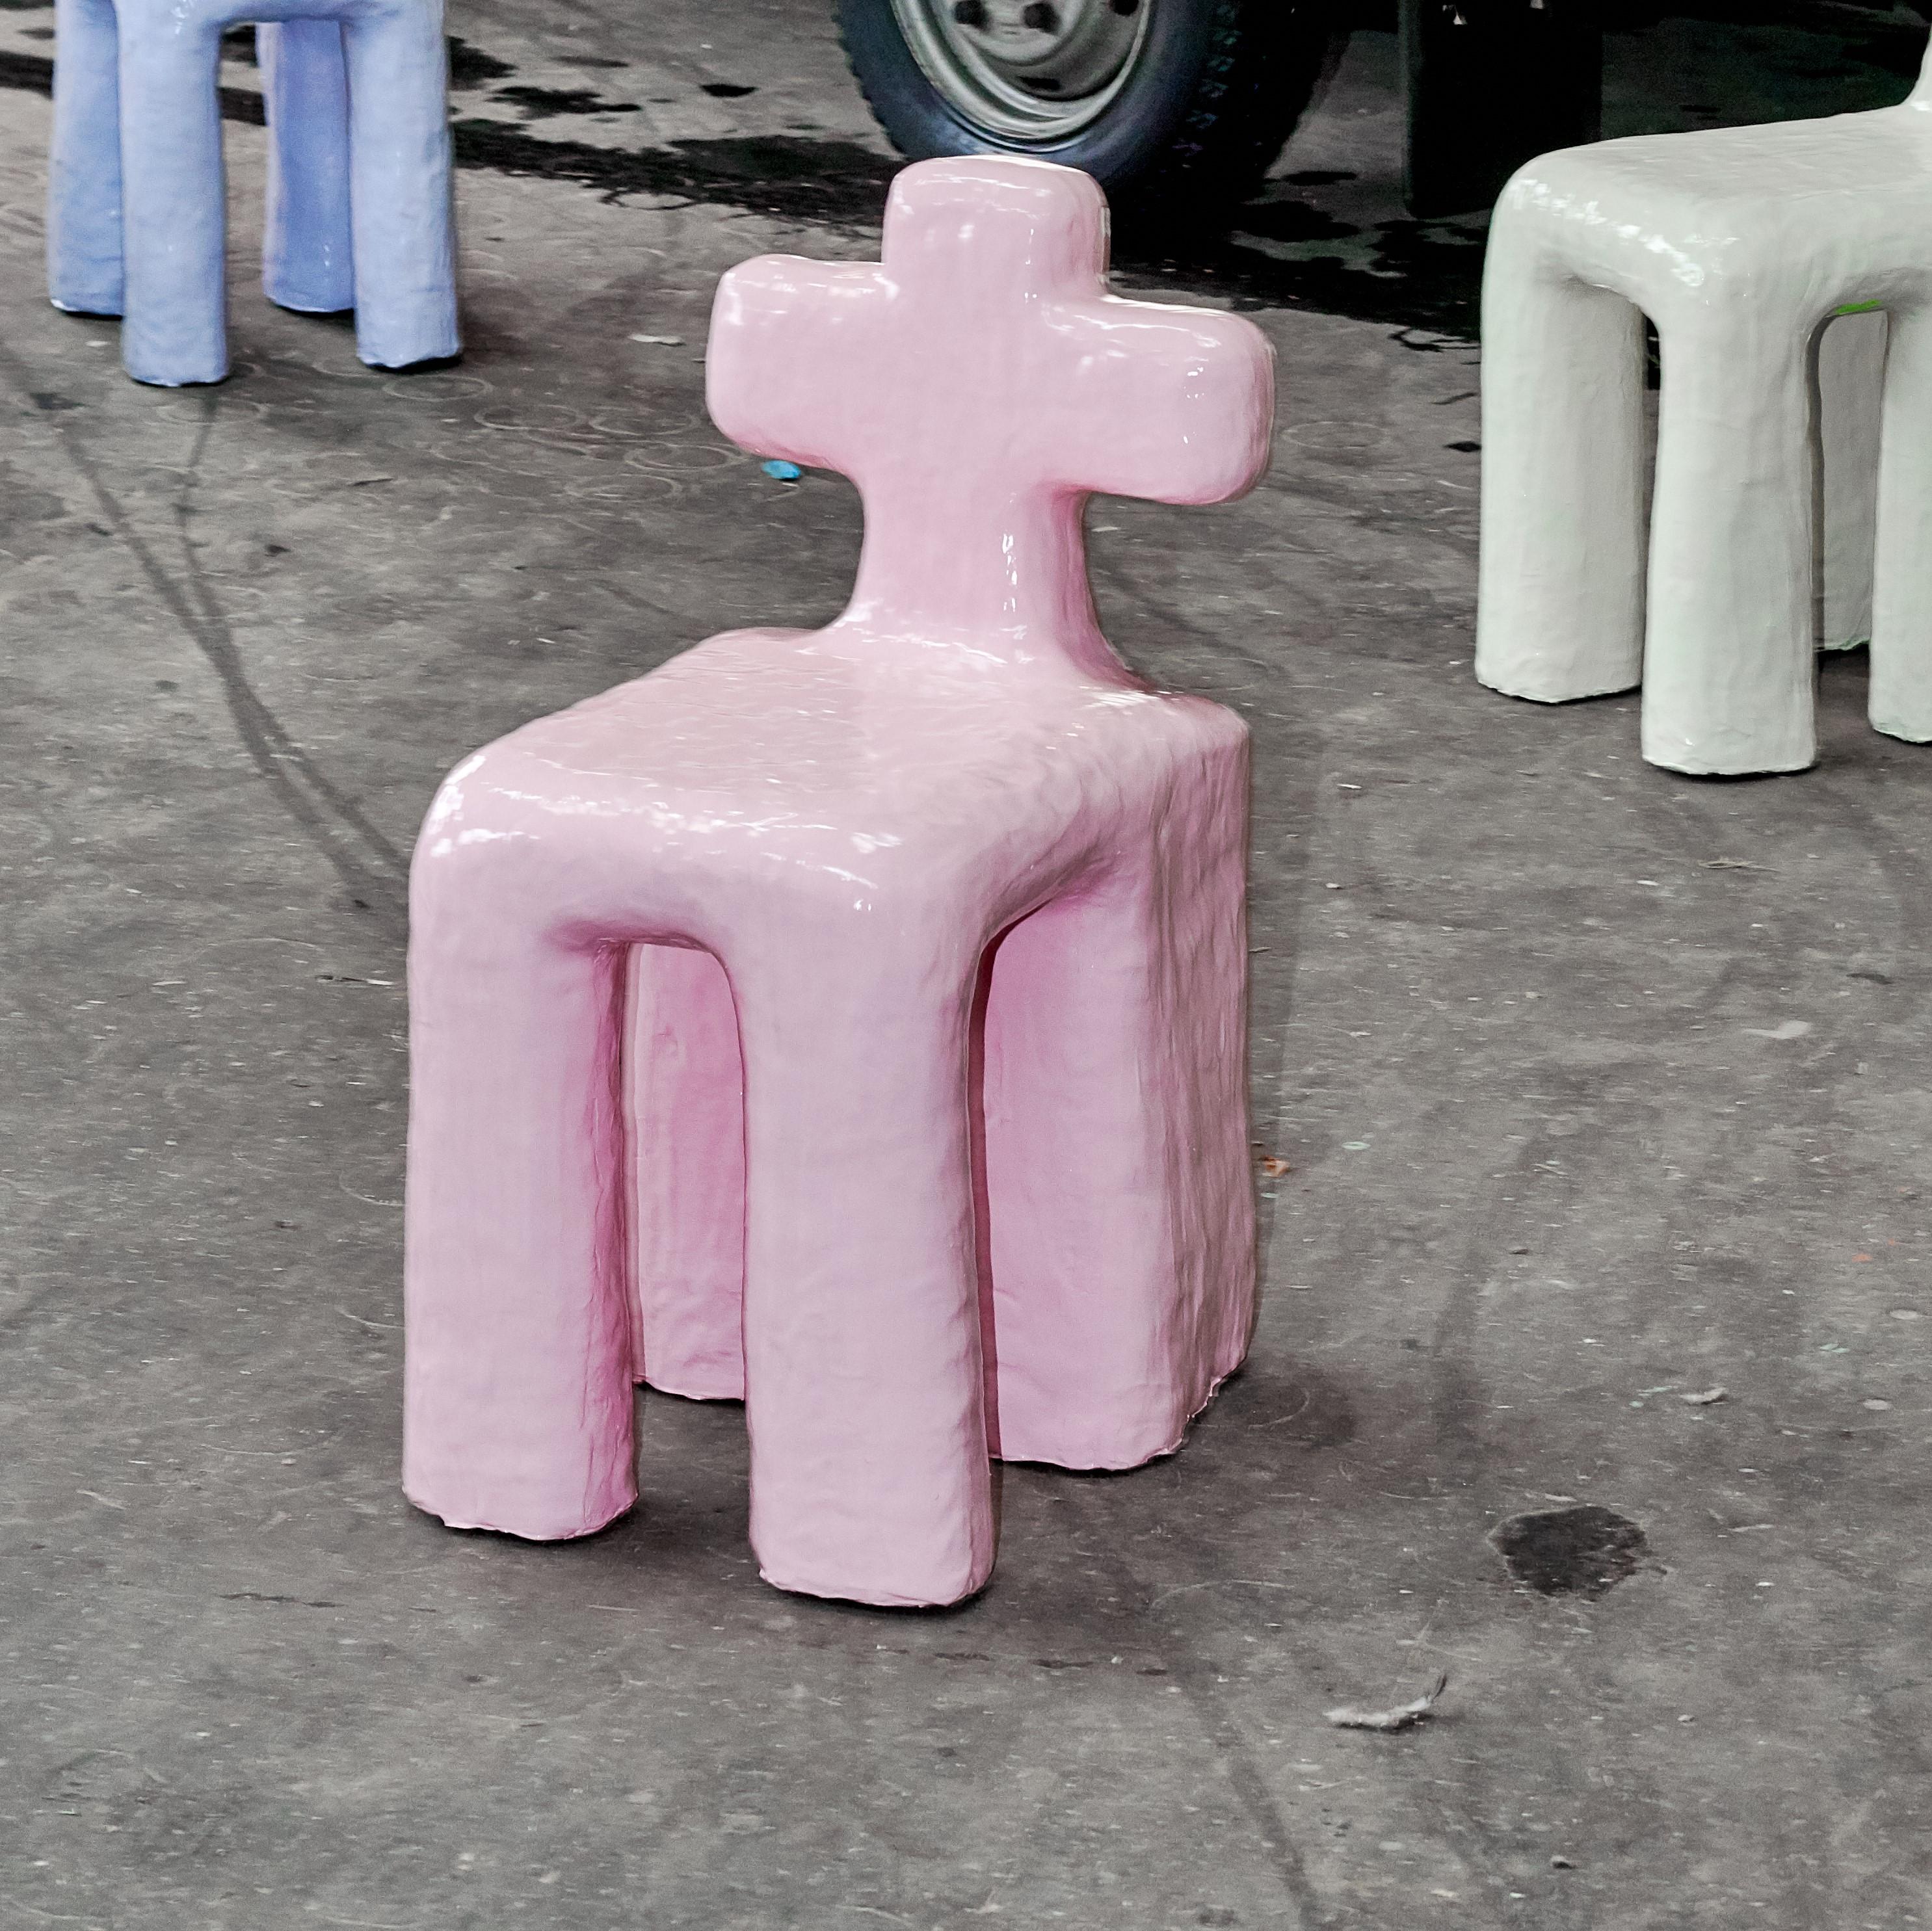 Dutch Funky Stool Made in 467 Minutes by Minute Manufacturing